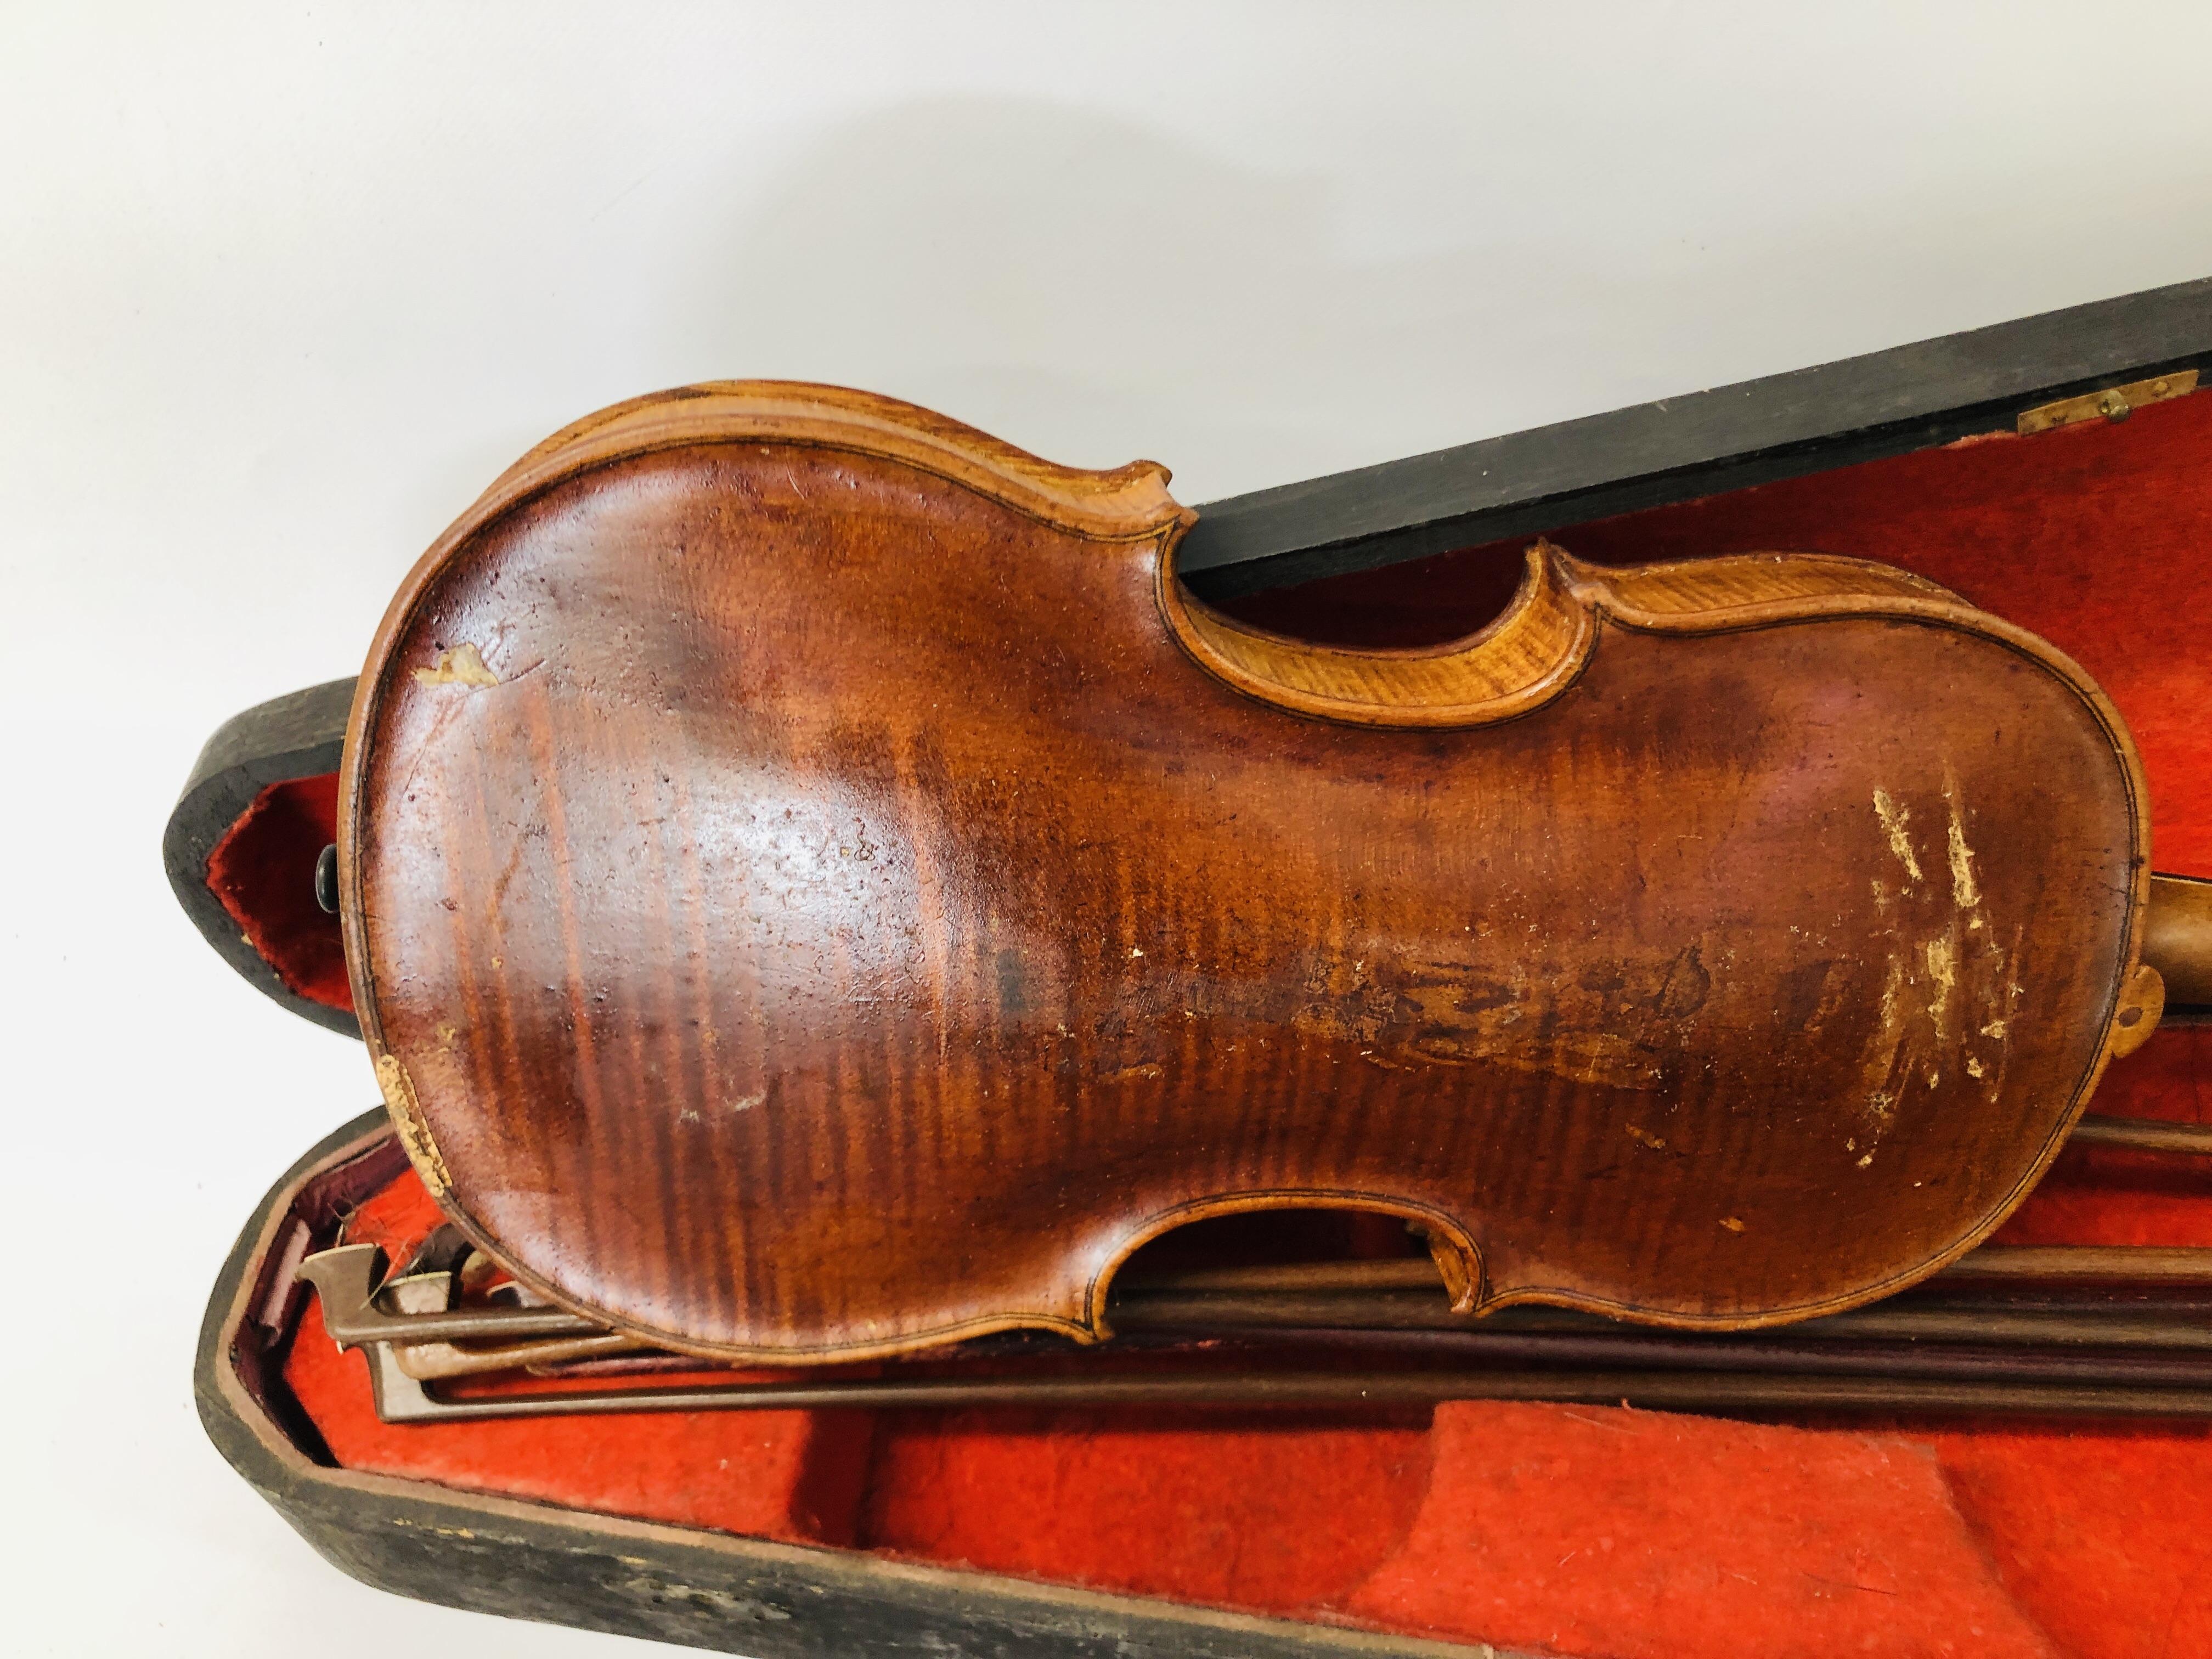 4 X VINTAGE VIOLINS AND 2 WOODEN CASES, VARIOUS BOWS (NO STRINGS) FOR RESTORATION. - Image 17 of 20